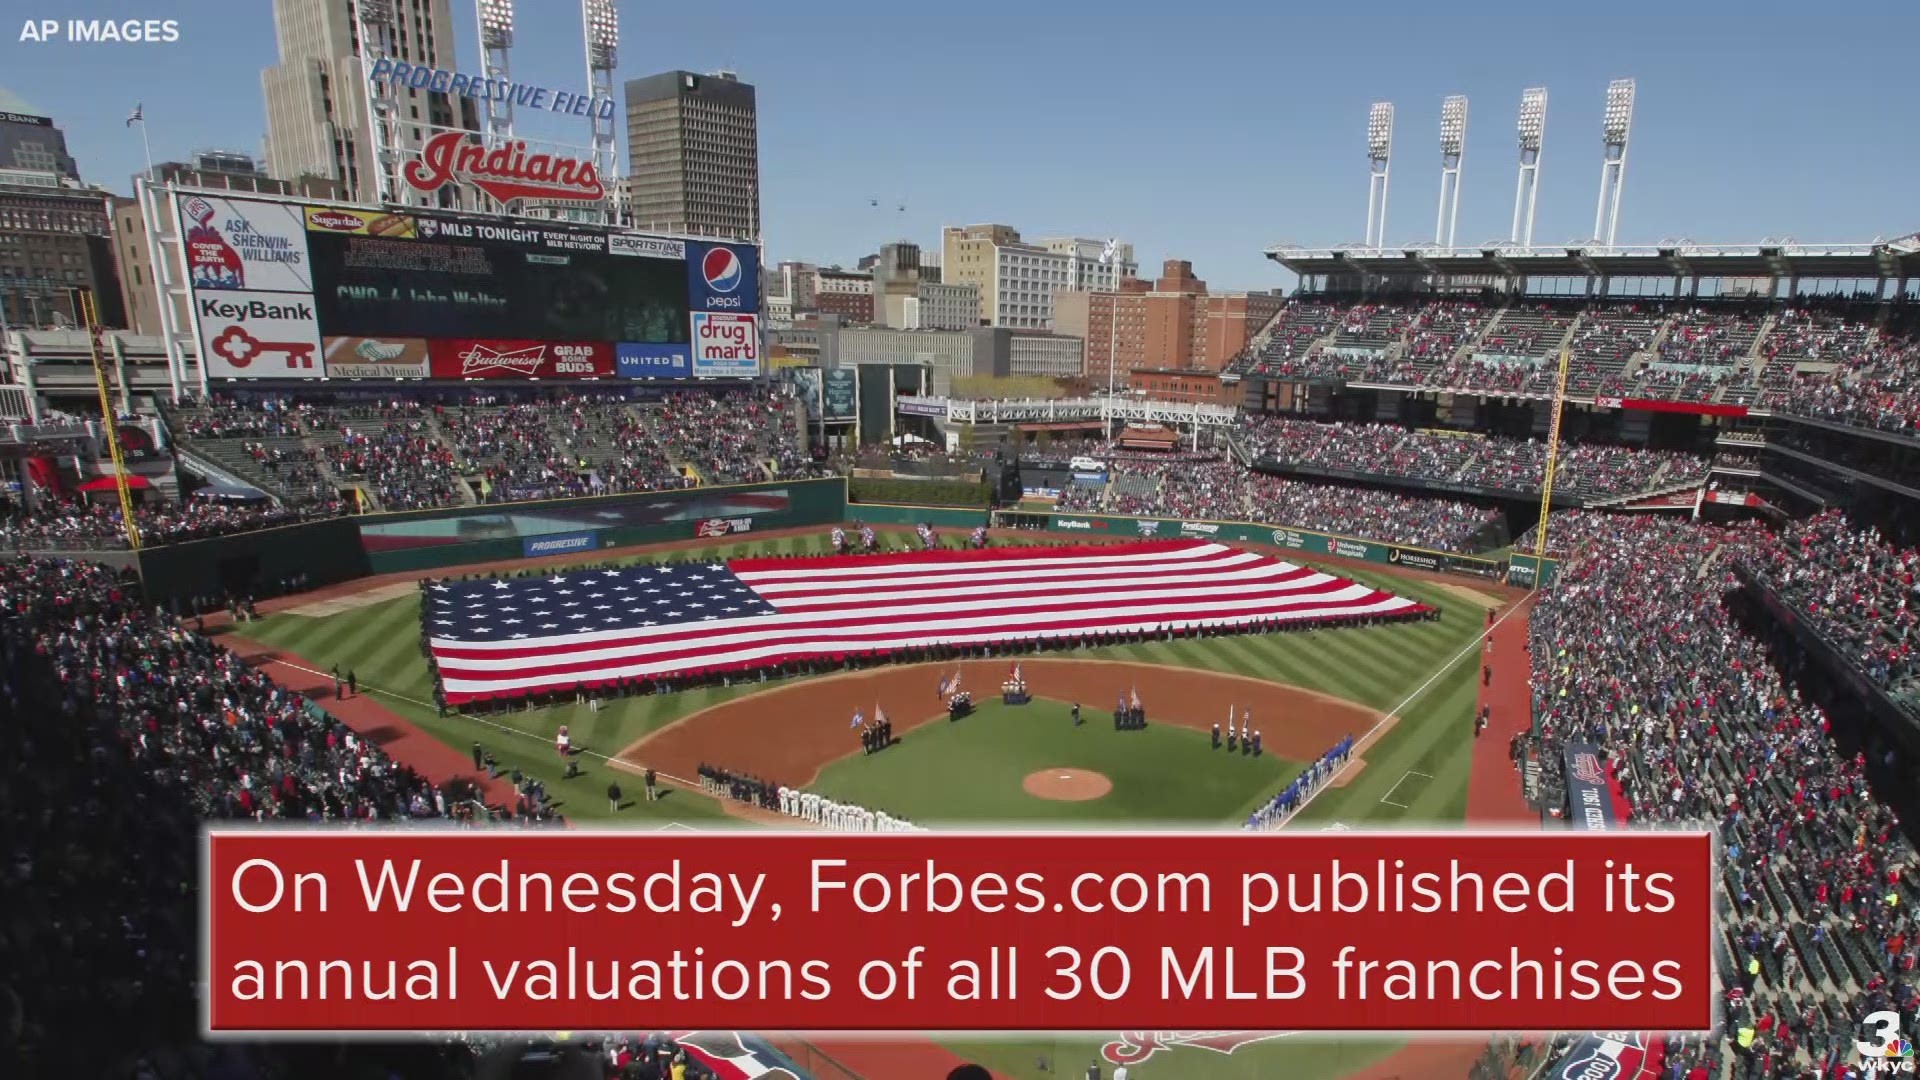 According to Forbes, the Cleveland Indians' value has improved to $1.2 billion in 2019.